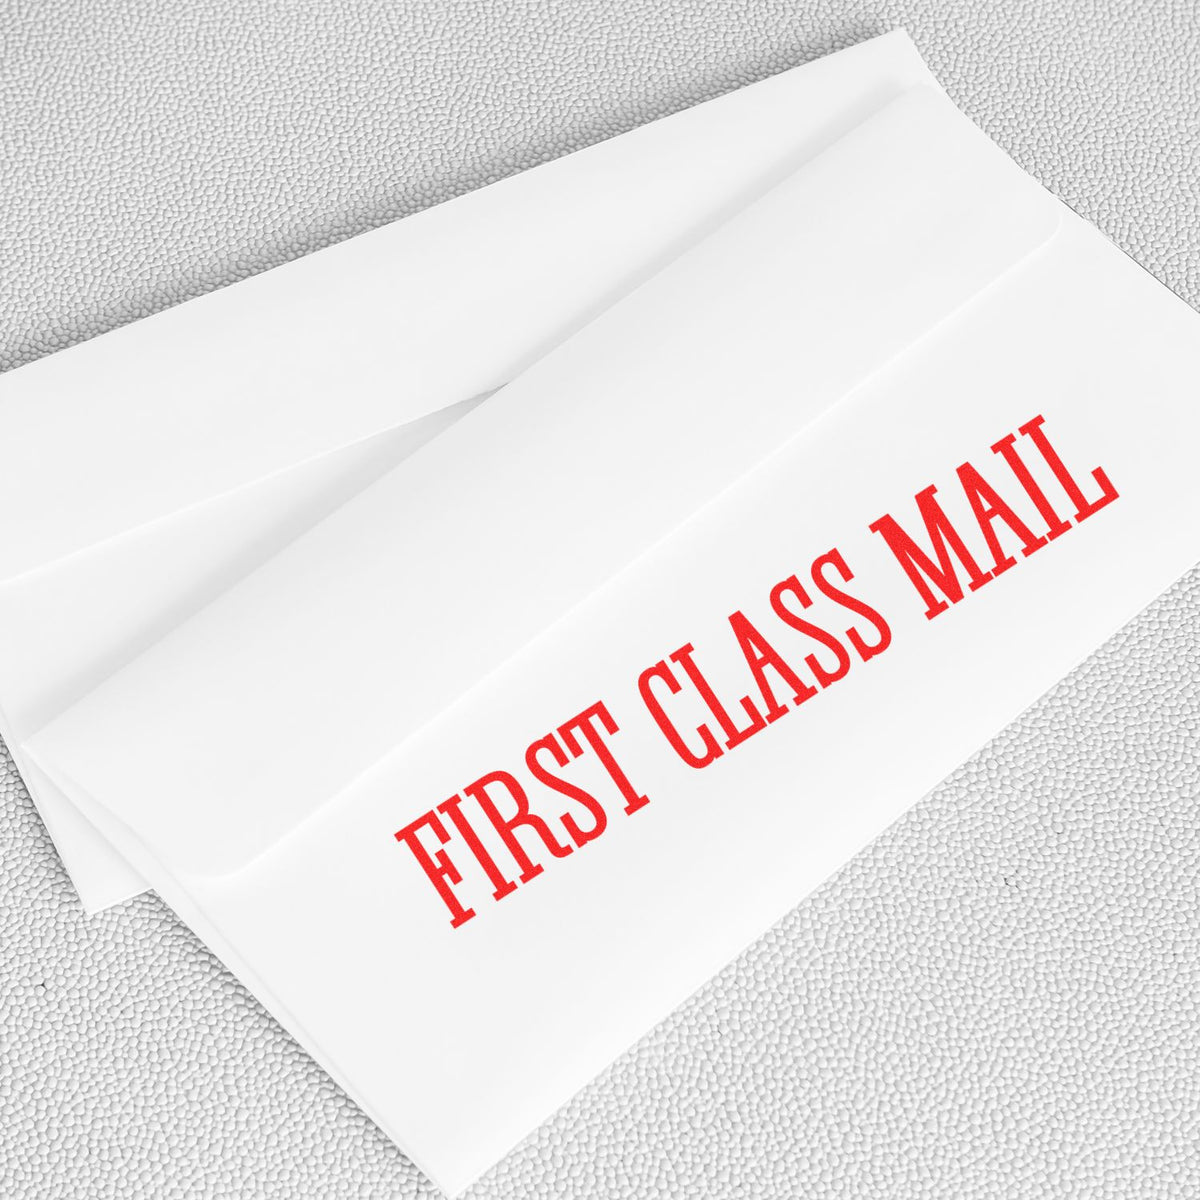 Large Times First Class Mail Rubber Stamp In Use Photo